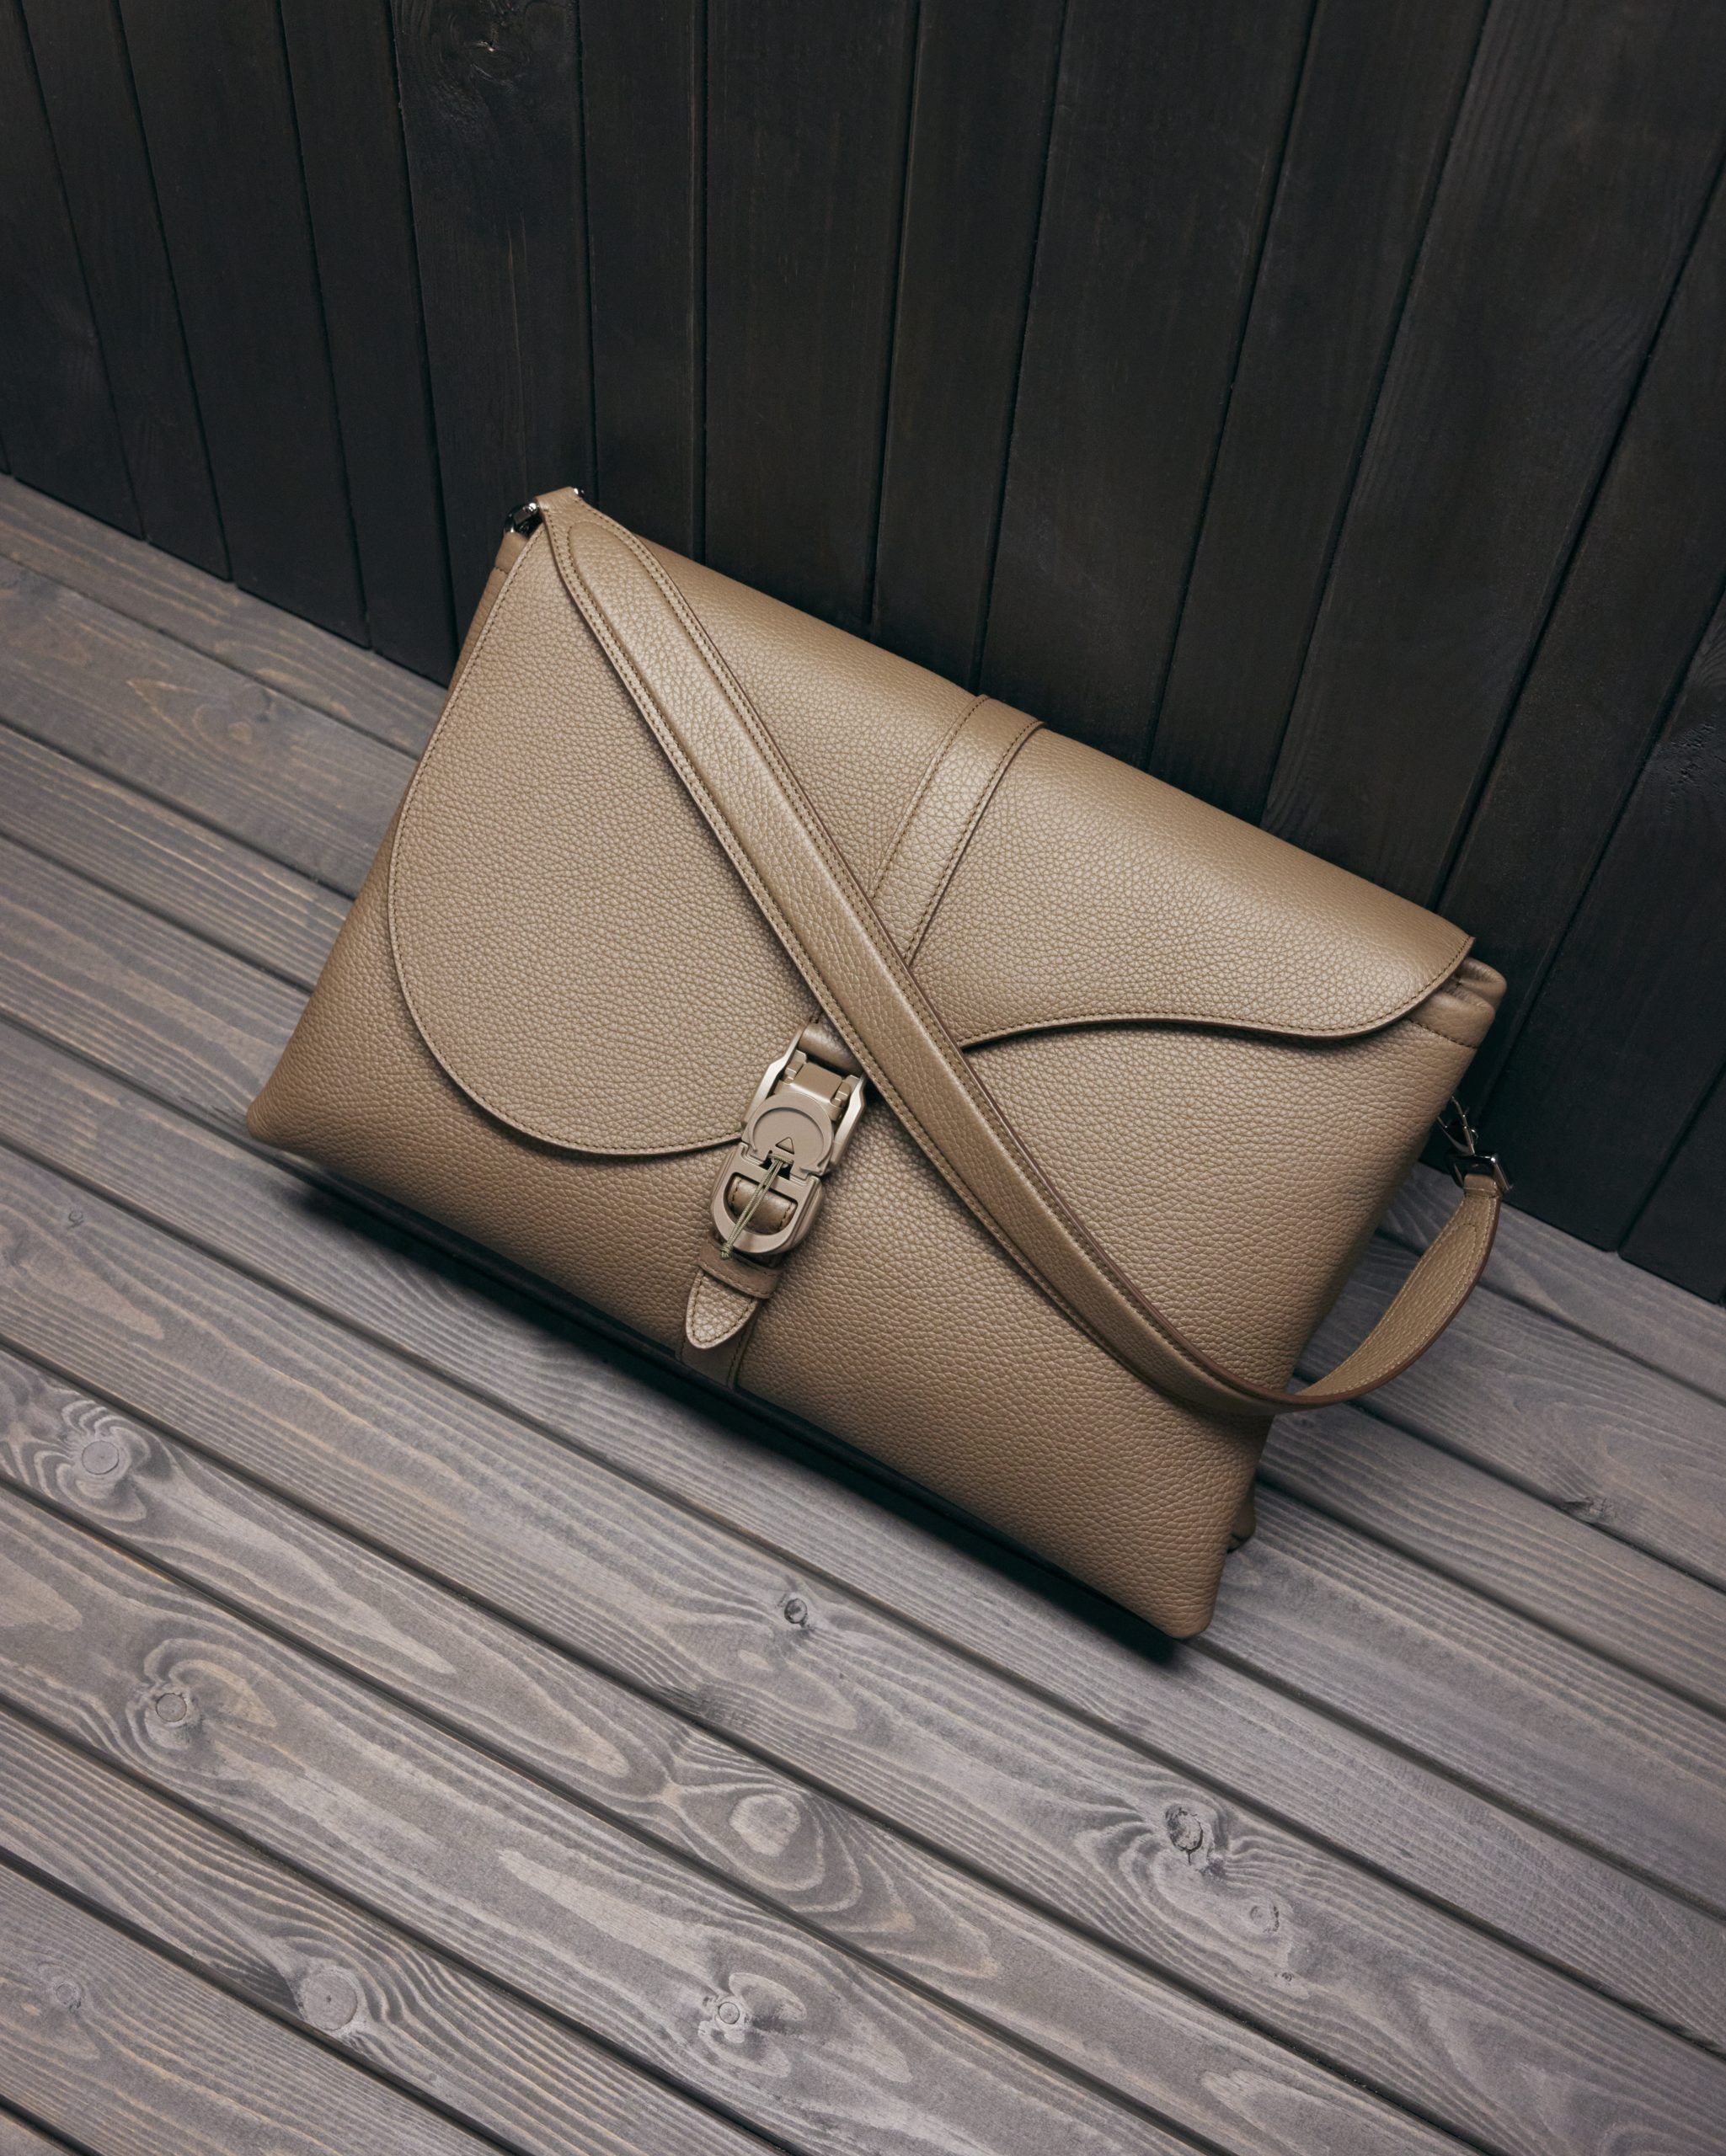 Dior's new Lingot Bag is a travel essential for your next holiday